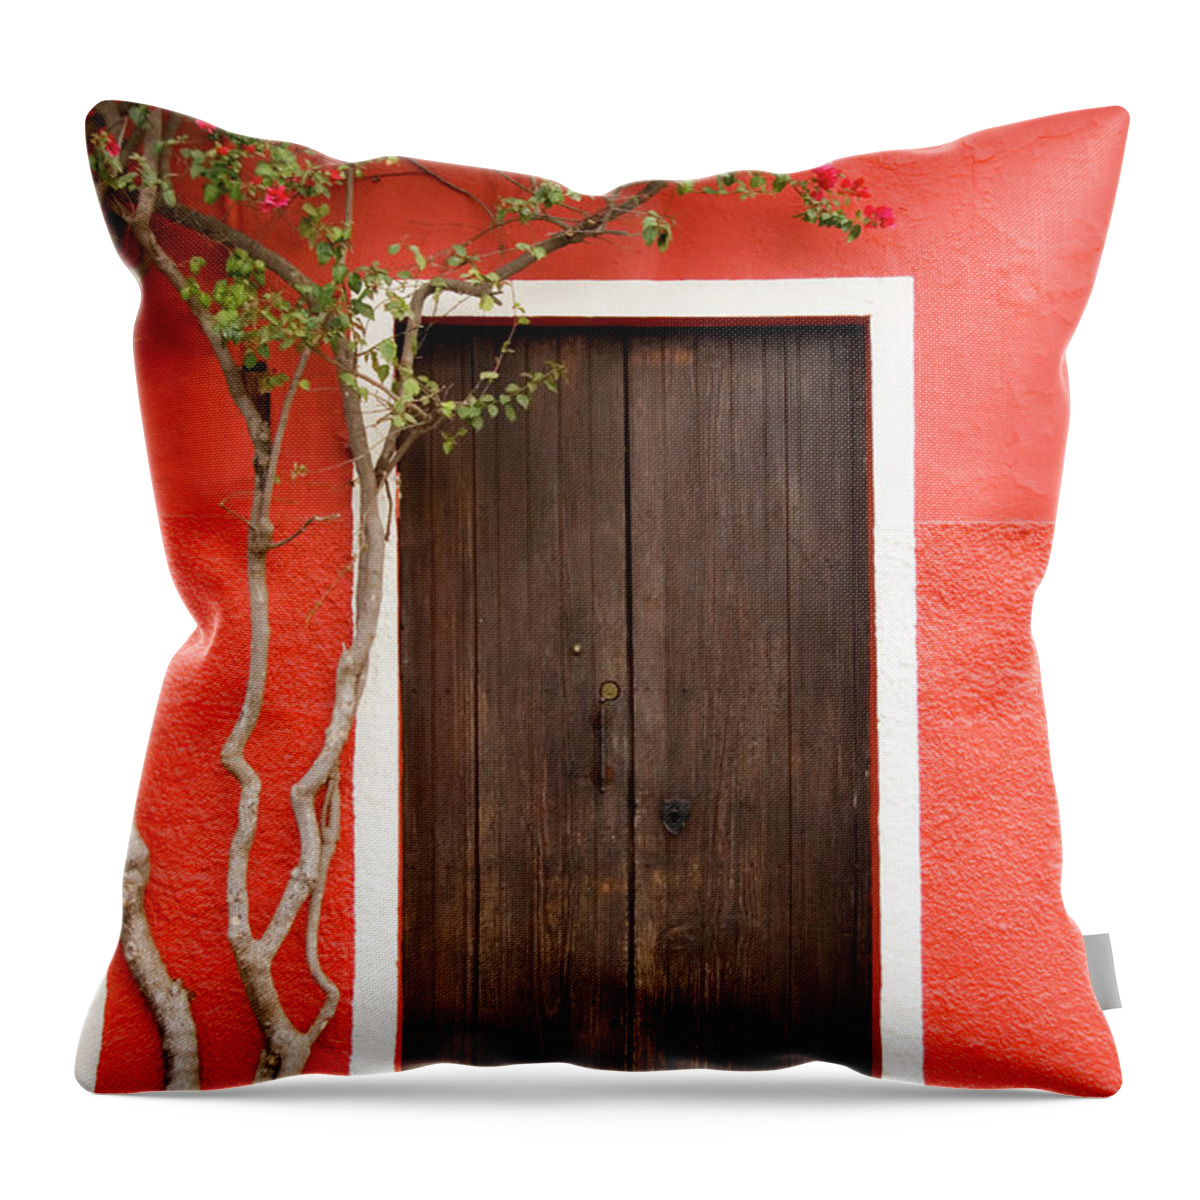 Built Structure Throw Pillow featuring the photograph Doorway by Livingimages